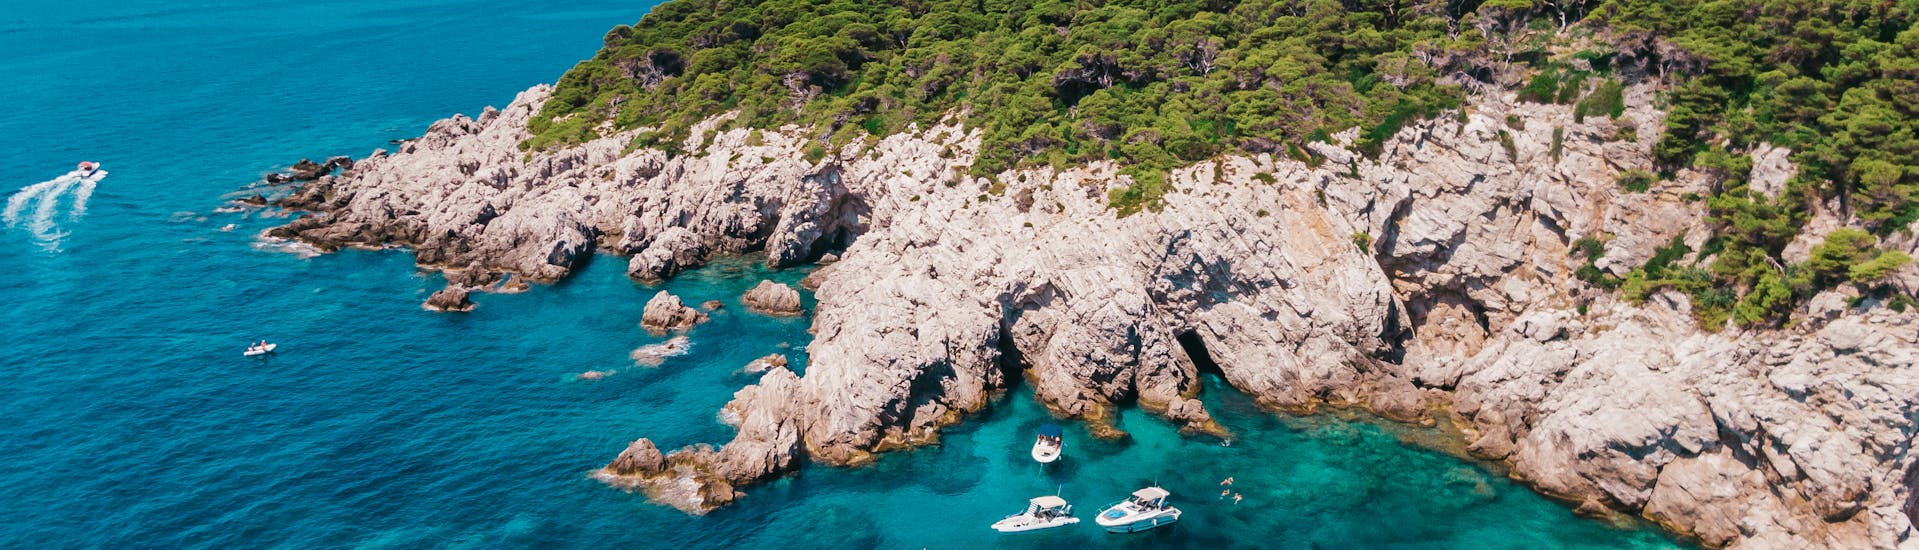 Beautiful view of the coast of Dubrovnik during a full day private boat trip to Elaphiti Islands with Rewind Dubrovnik by boat.